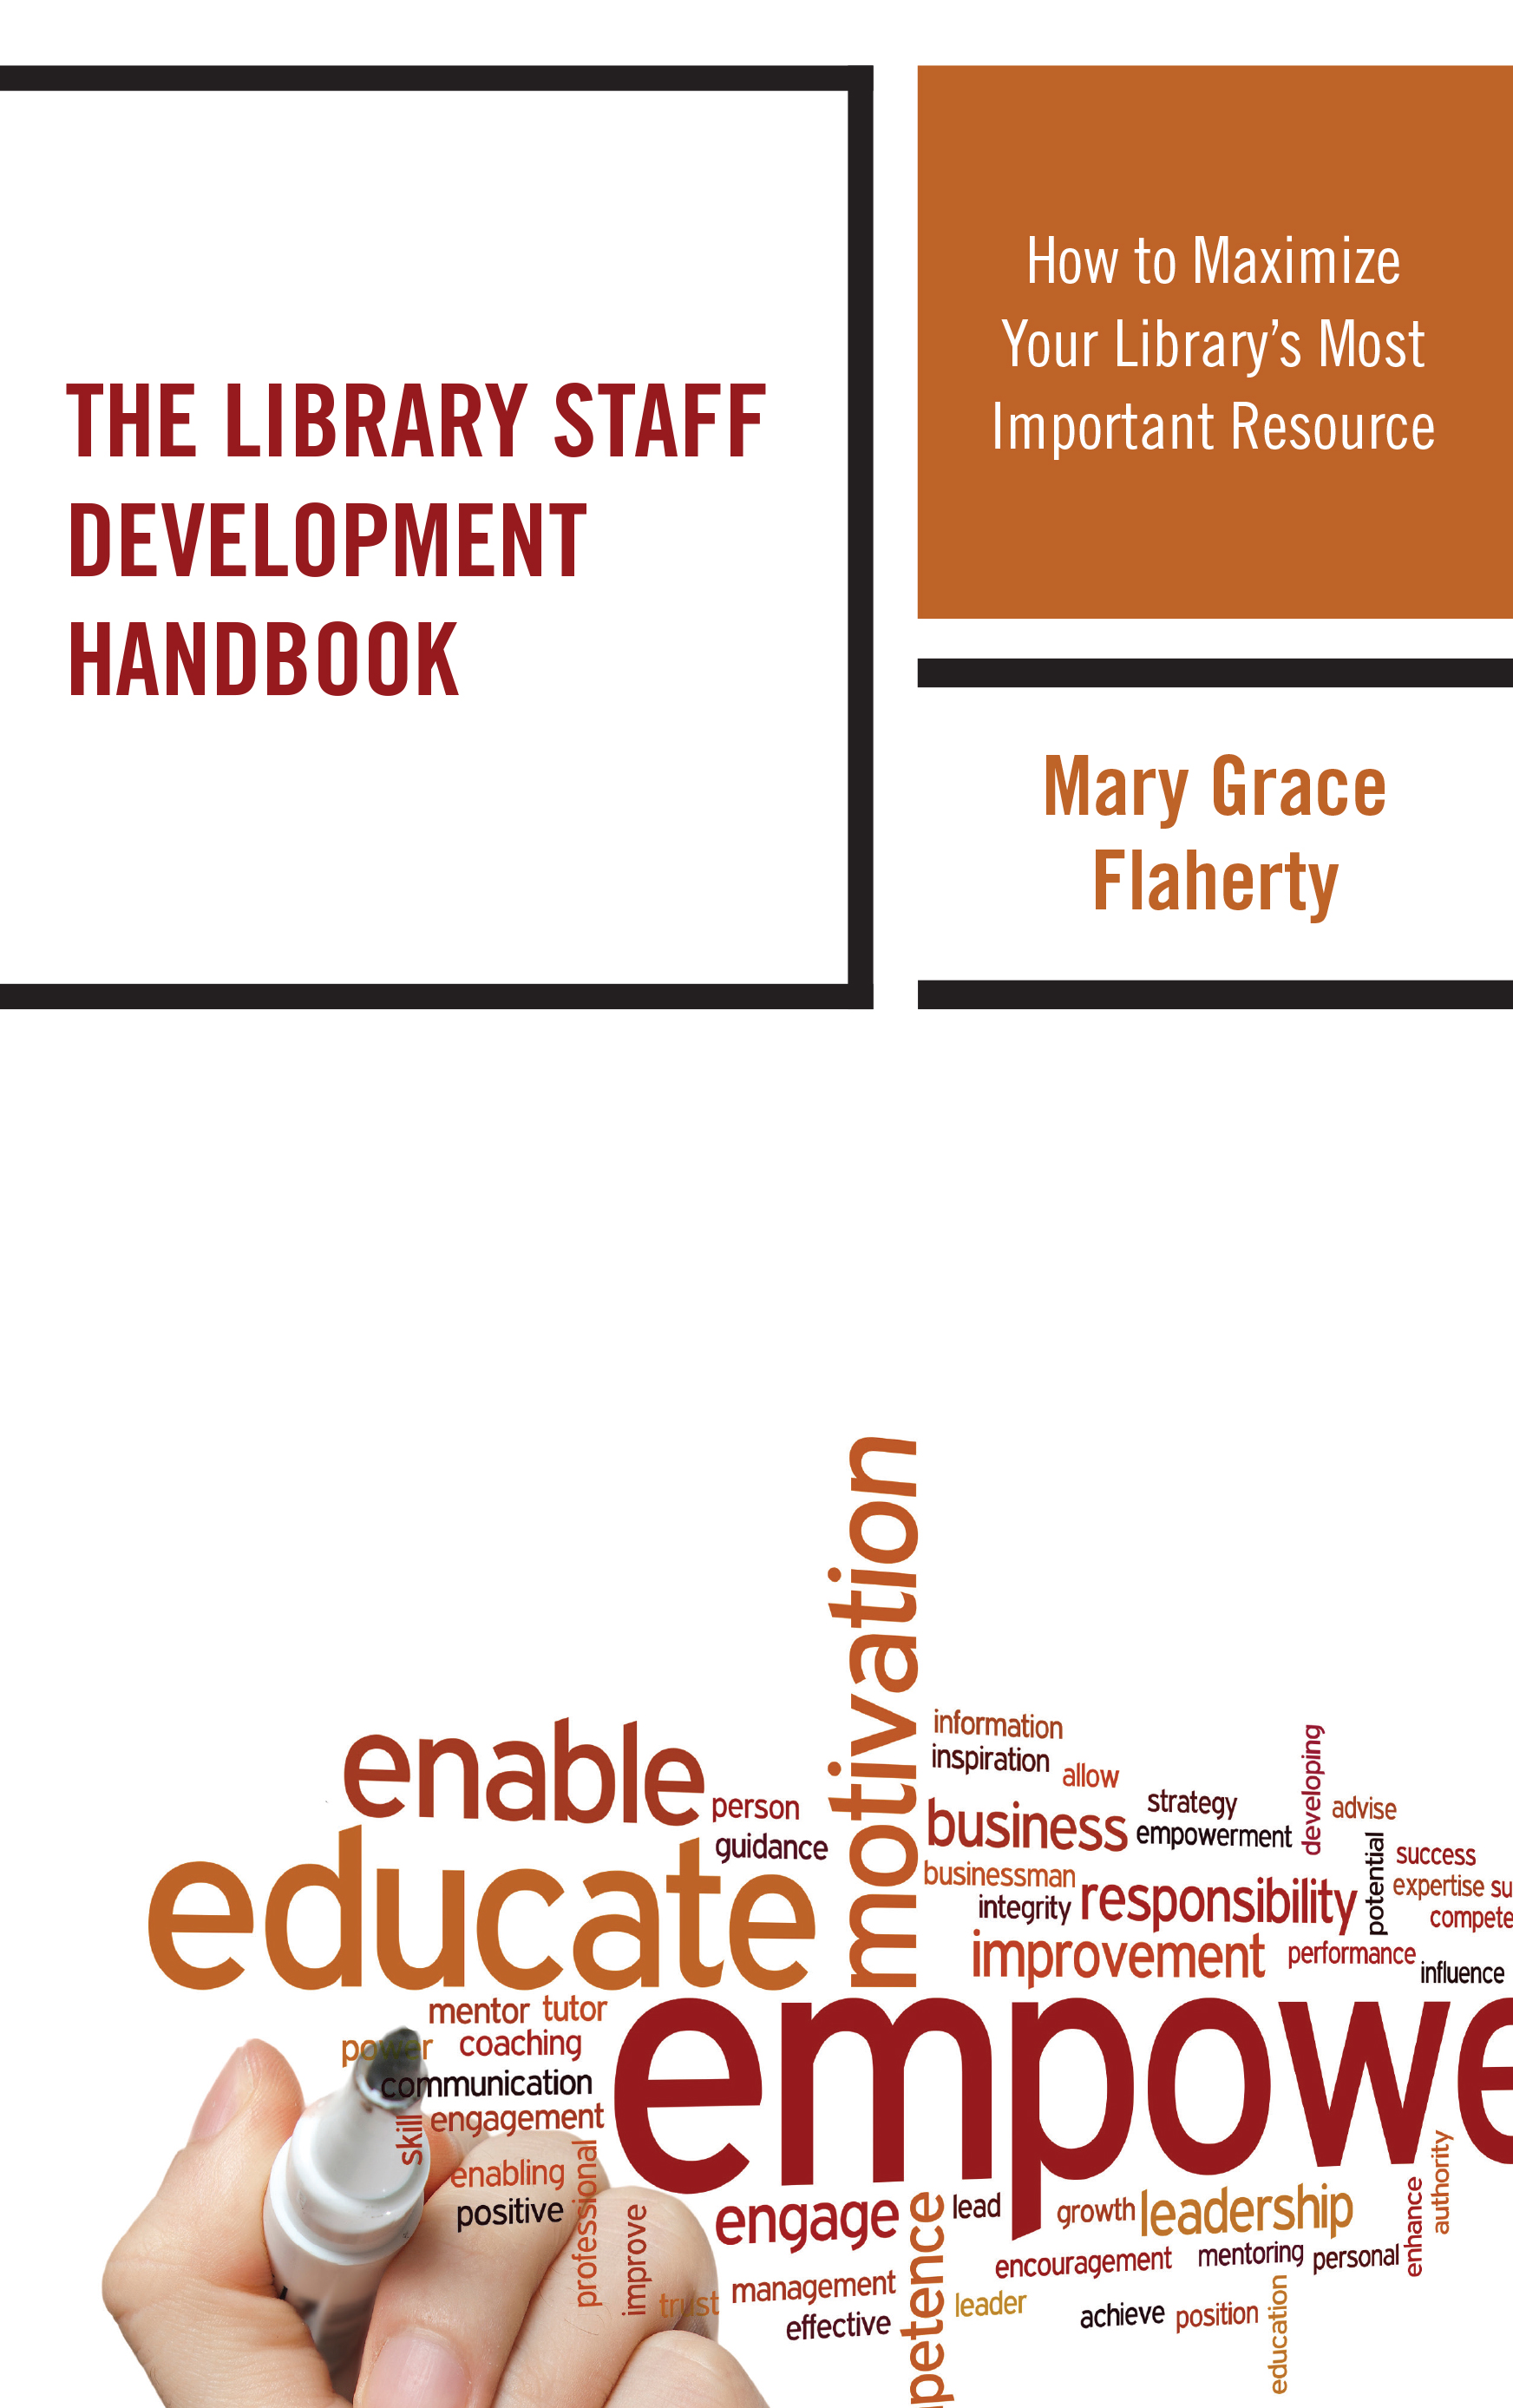 The Library Staff Development Handbook: How to Maximize Your Library’s Most Important Resource